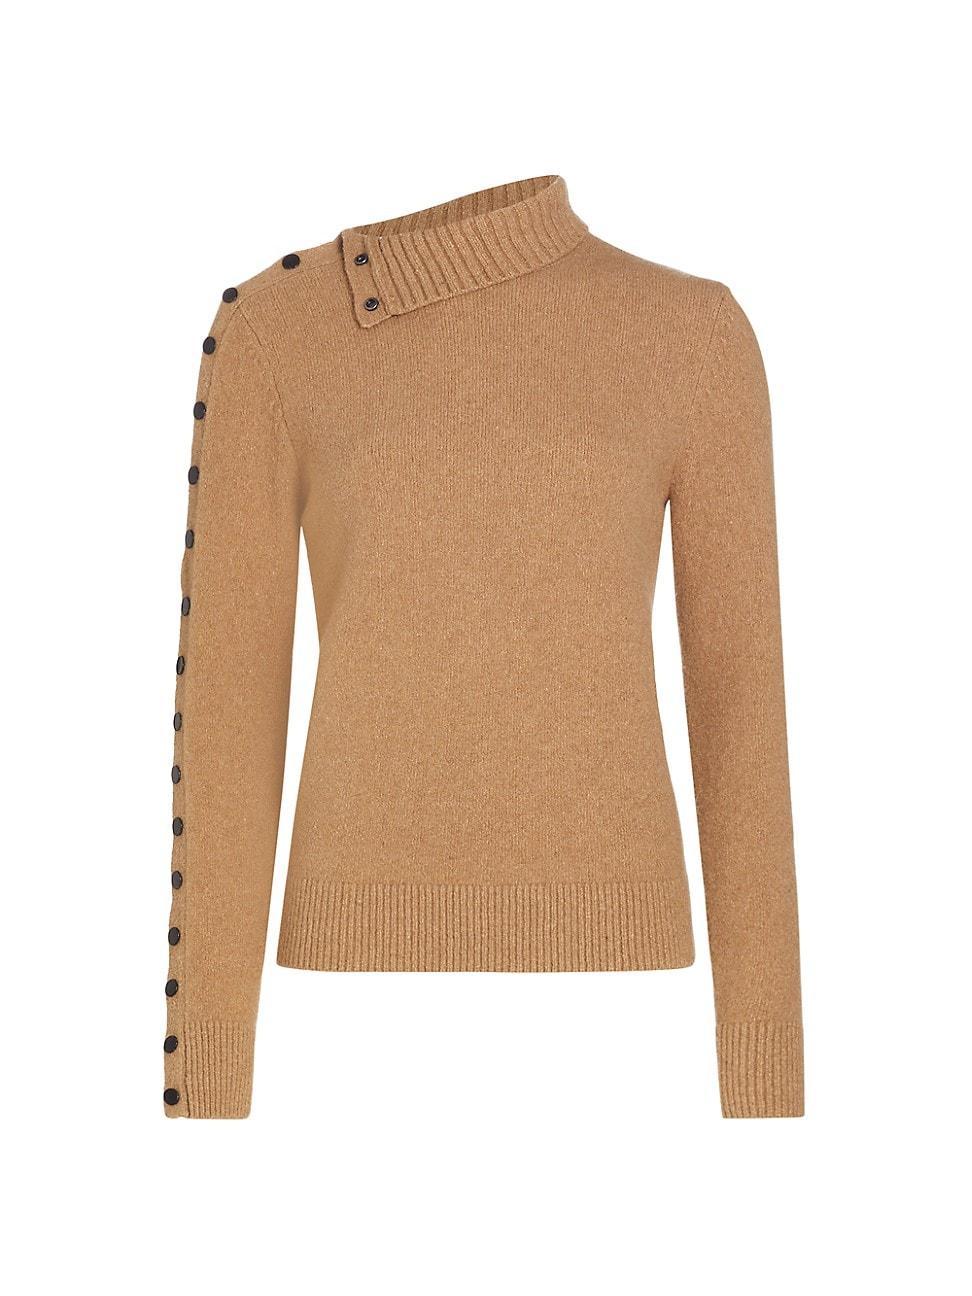 Womens Cashmere Buttoned Sweater Product Image